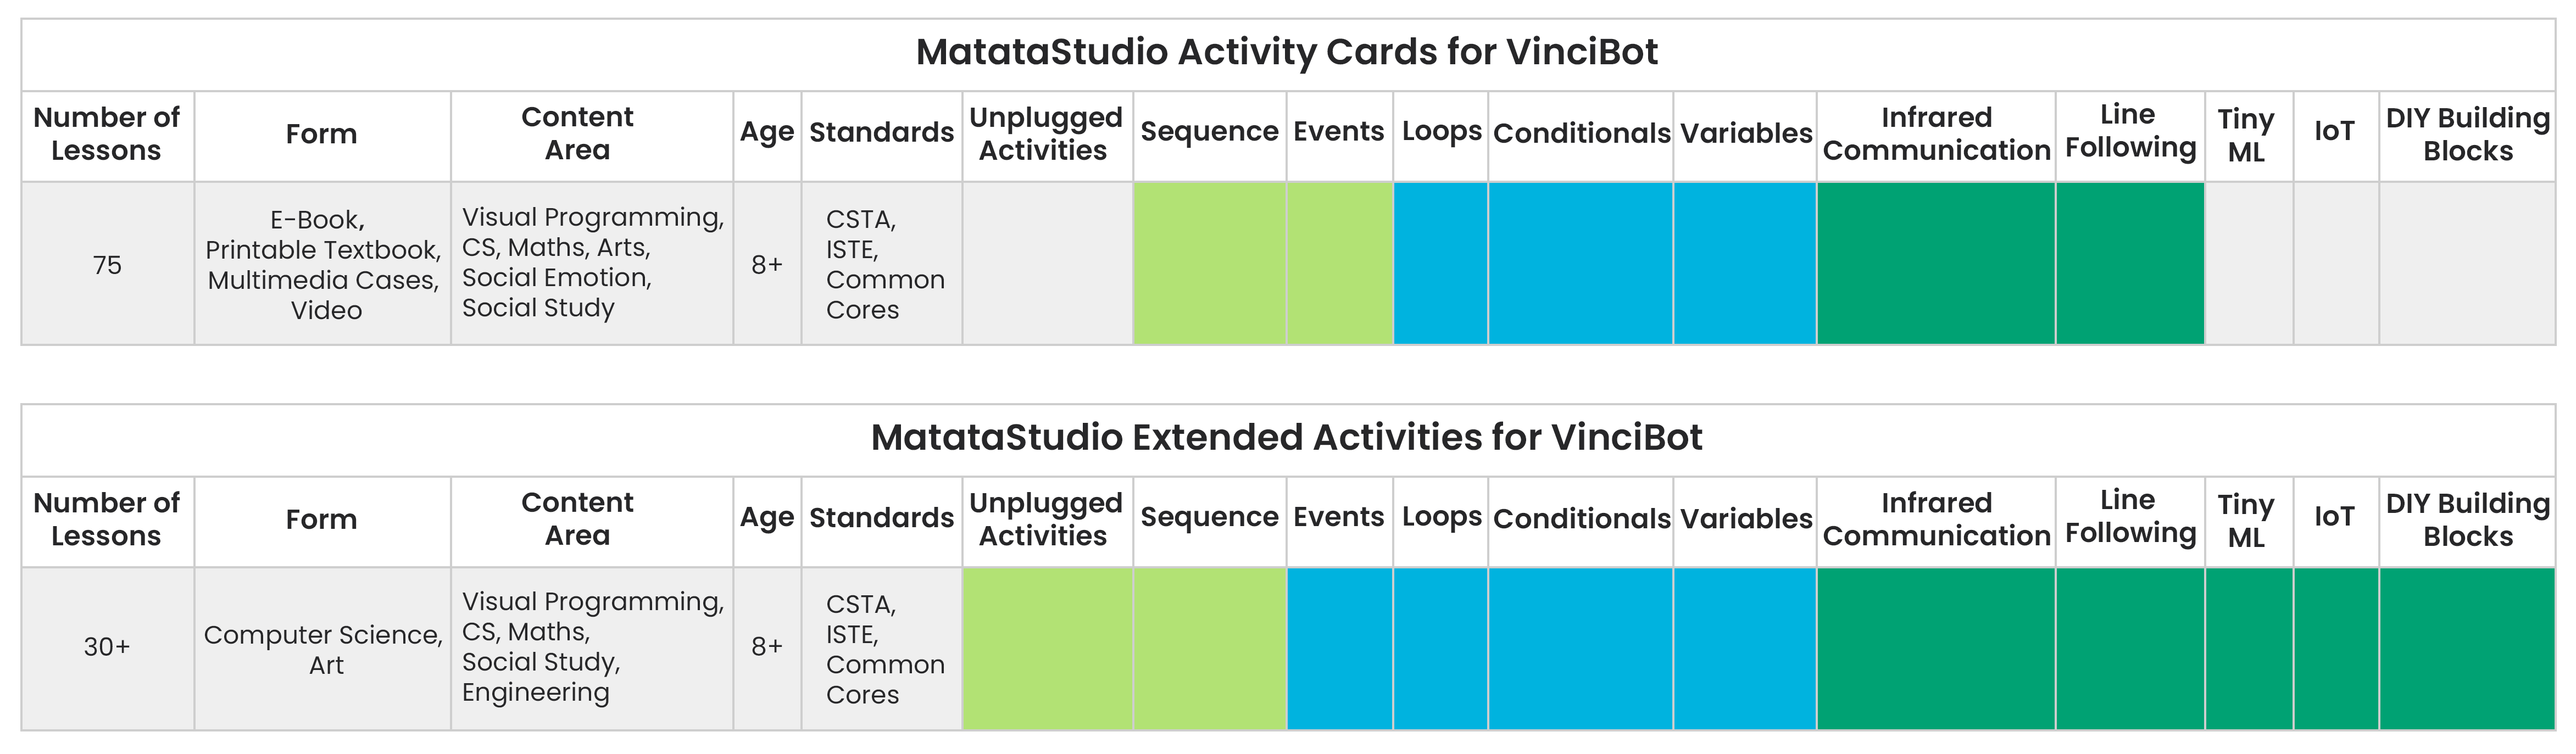 Activity Cards for VinciBot - Matatalab